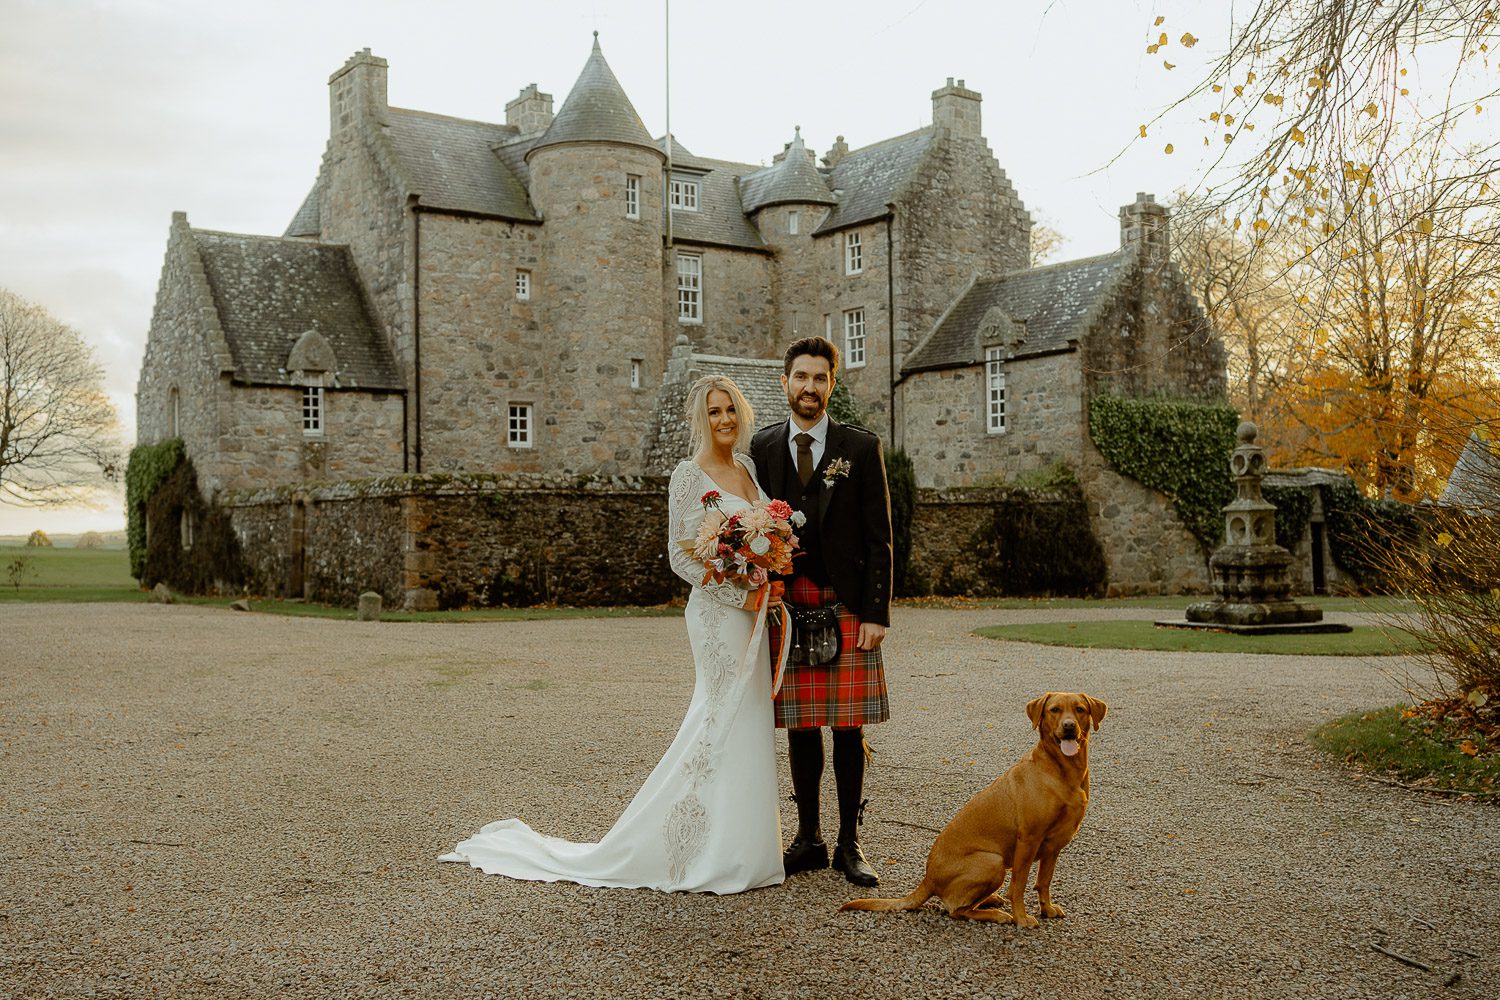 Bride and Groom holding each other next to dog in front of castle